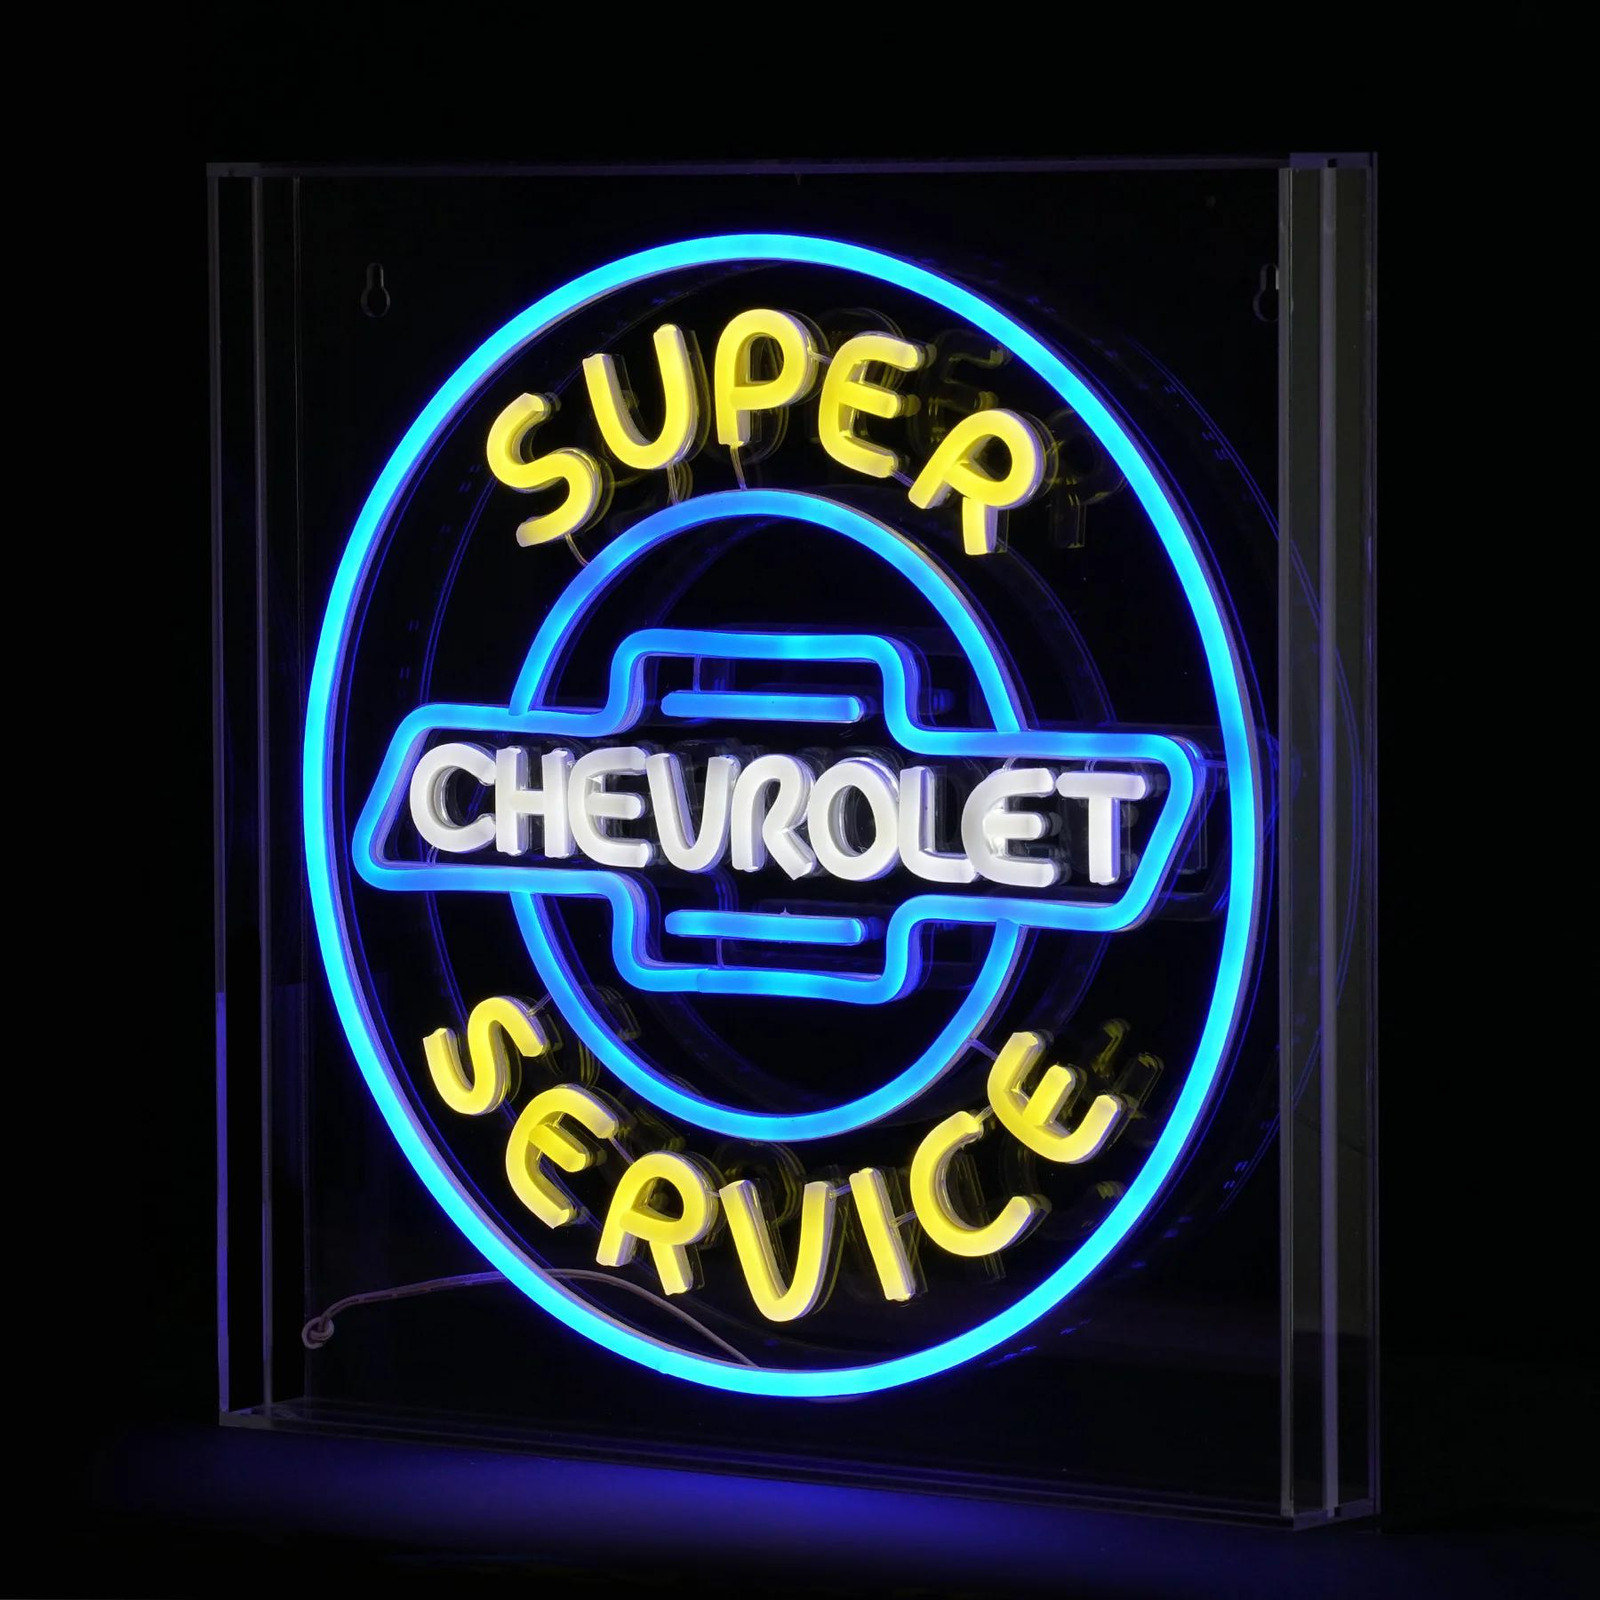 Chevrolet Acrylic LED Sign Neon Like Tubing Chevy Super Service Wall Decor